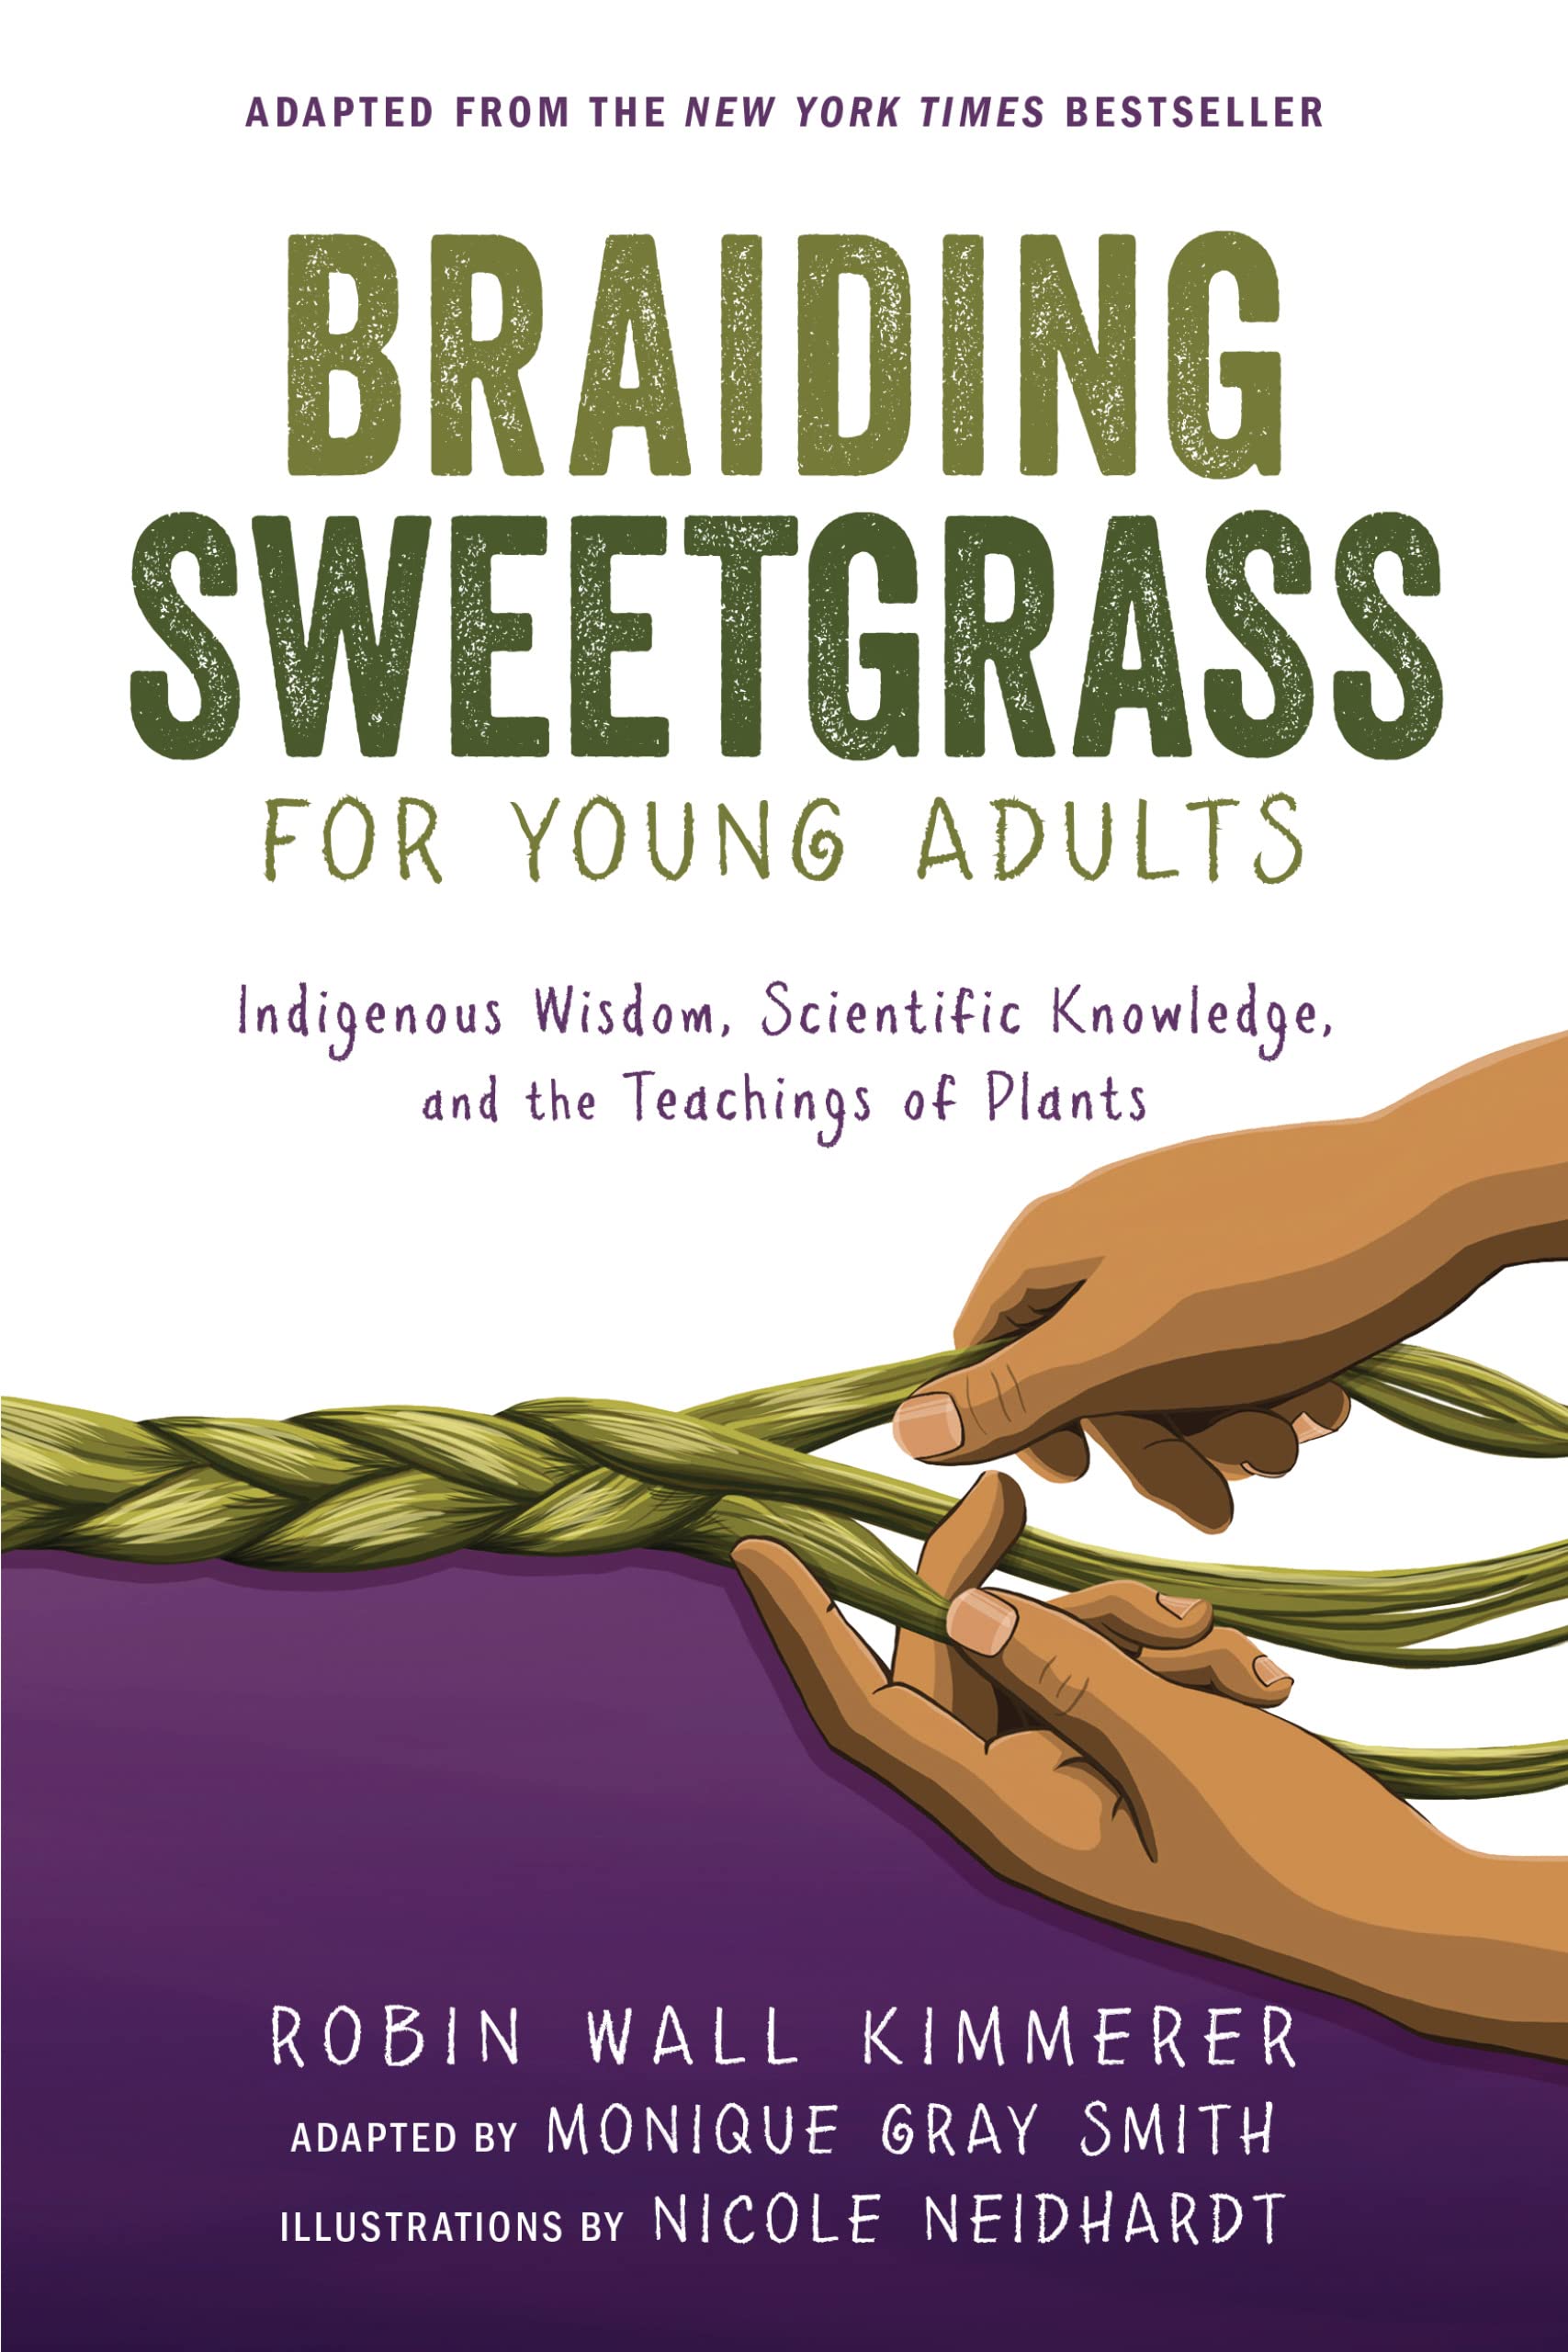 Braiding Sweetgrass for Young Adults: Indigenous Wisdom, Scientific Knowledge, and the Teachings of Plants (Paperback)